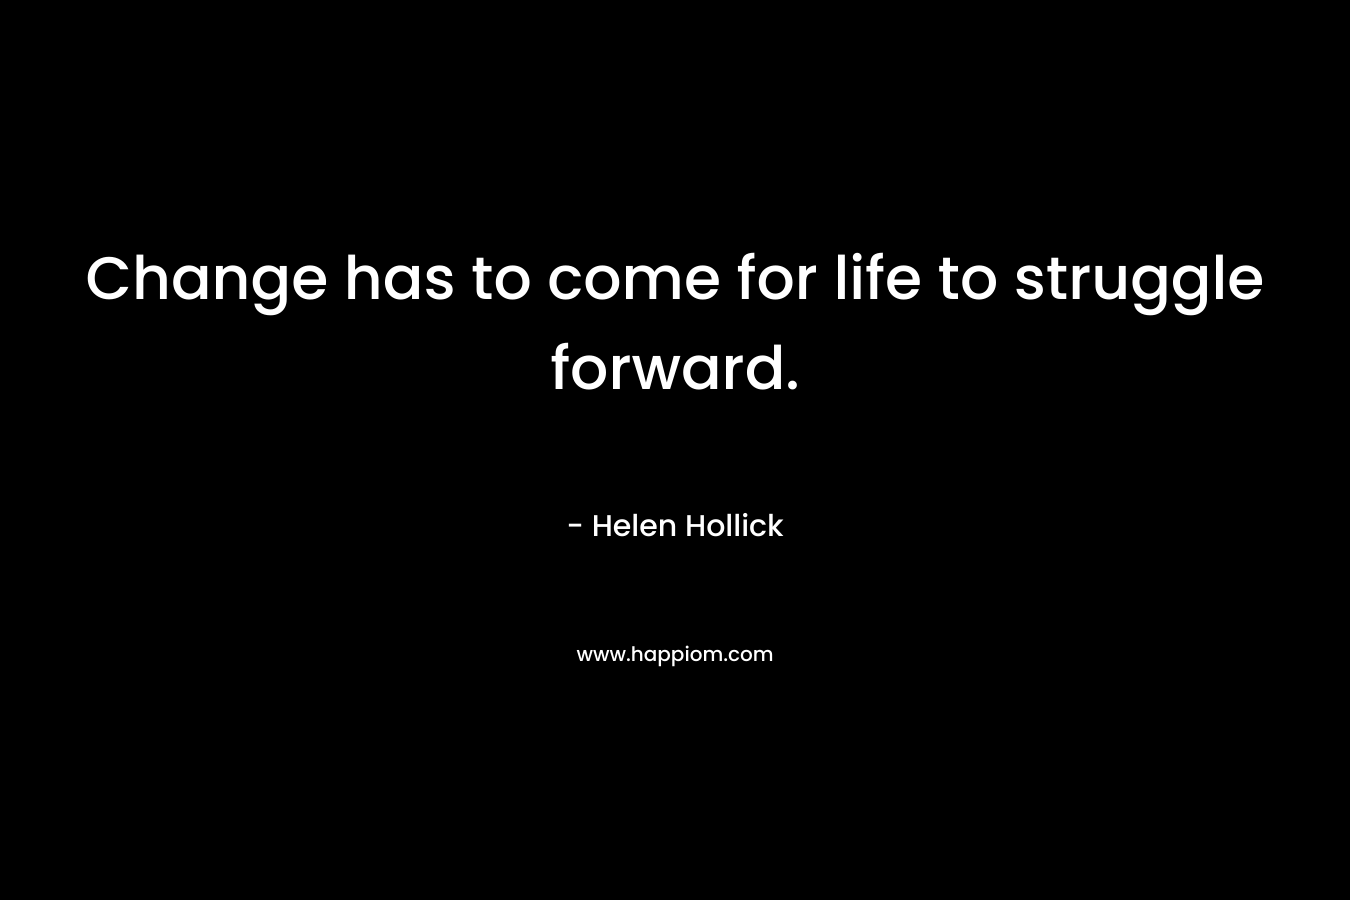 Change has to come for life to struggle forward.